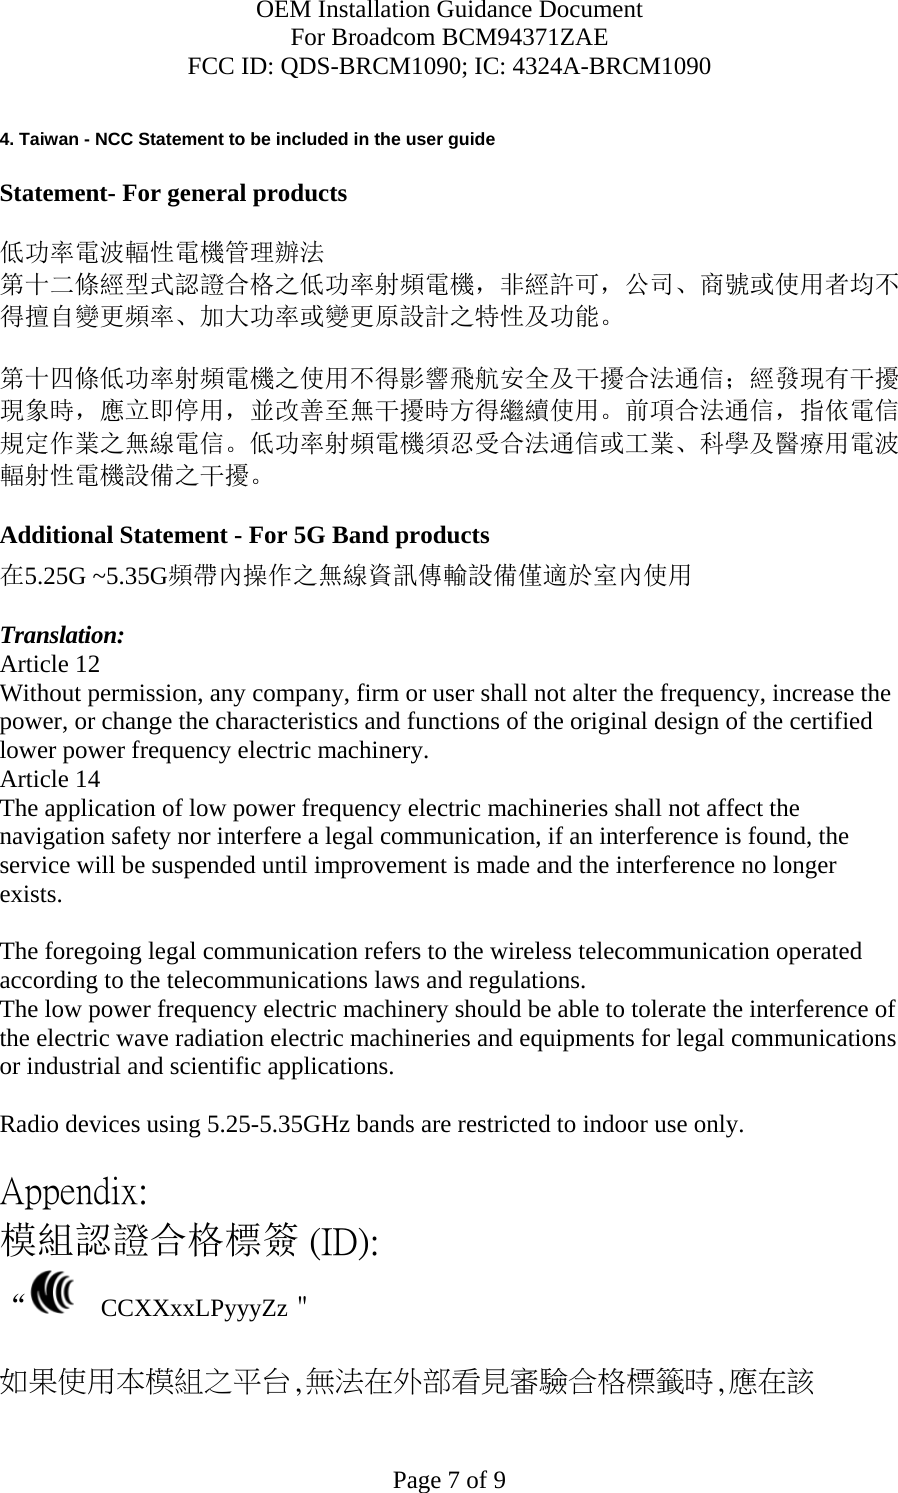 OEM Installation Guidance Document For Broadcom BCM94371ZAE FCC ID: QDS-BRCM1090; IC: 4324A-BRCM1090  Page 7 of 9  4. Taiwan - NCC Statement to be included in the user guide  Statement- For general products  低功率電波輻性電機管理辦法 第十二條經型式認證合格之低功率射頻電機，非經許可，公司、商號或使用者均不得擅自變更頻率、加大功率或變更原設計之特性及功能。  第十四條低功率射頻電機之使用不得影響飛航安全及干擾合法通信；經發現有干擾現象時，應立即停用，並改善至無干擾時方得繼續使用。前項合法通信，指依電信規定作業之無線電信。低功率射頻電機須忍受合法通信或工業、科學及醫療用電波輻射性電機設備之干擾。  Additional Statement - For 5G Band products 在5.25G ~5.35G頻帶內操作之無線資訊傳輸設備僅適於室內使用  Translation: Article 12 Without permission, any company, firm or user shall not alter the frequency, increase the power, or change the characteristics and functions of the original design of the certified lower power frequency electric machinery. Article 14 The application of low power frequency electric machineries shall not affect the navigation safety nor interfere a legal communication, if an interference is found, the service will be suspended until improvement is made and the interference no longer exists.  The foregoing legal communication refers to the wireless telecommunication operated according to the telecommunications laws and regulations. The low power frequency electric machinery should be able to tolerate the interference of the electric wave radiation electric machineries and equipments for legal communications or industrial and scientific applications.  Radio devices using 5.25-5.35GHz bands are restricted to indoor use only.  Appendix: 模組認證合格標簽 (ID): “   CCXXxxLPyyyZz＂  如果使用本模組之平台,無法在外部看見審驗合格標籤時,應在該 